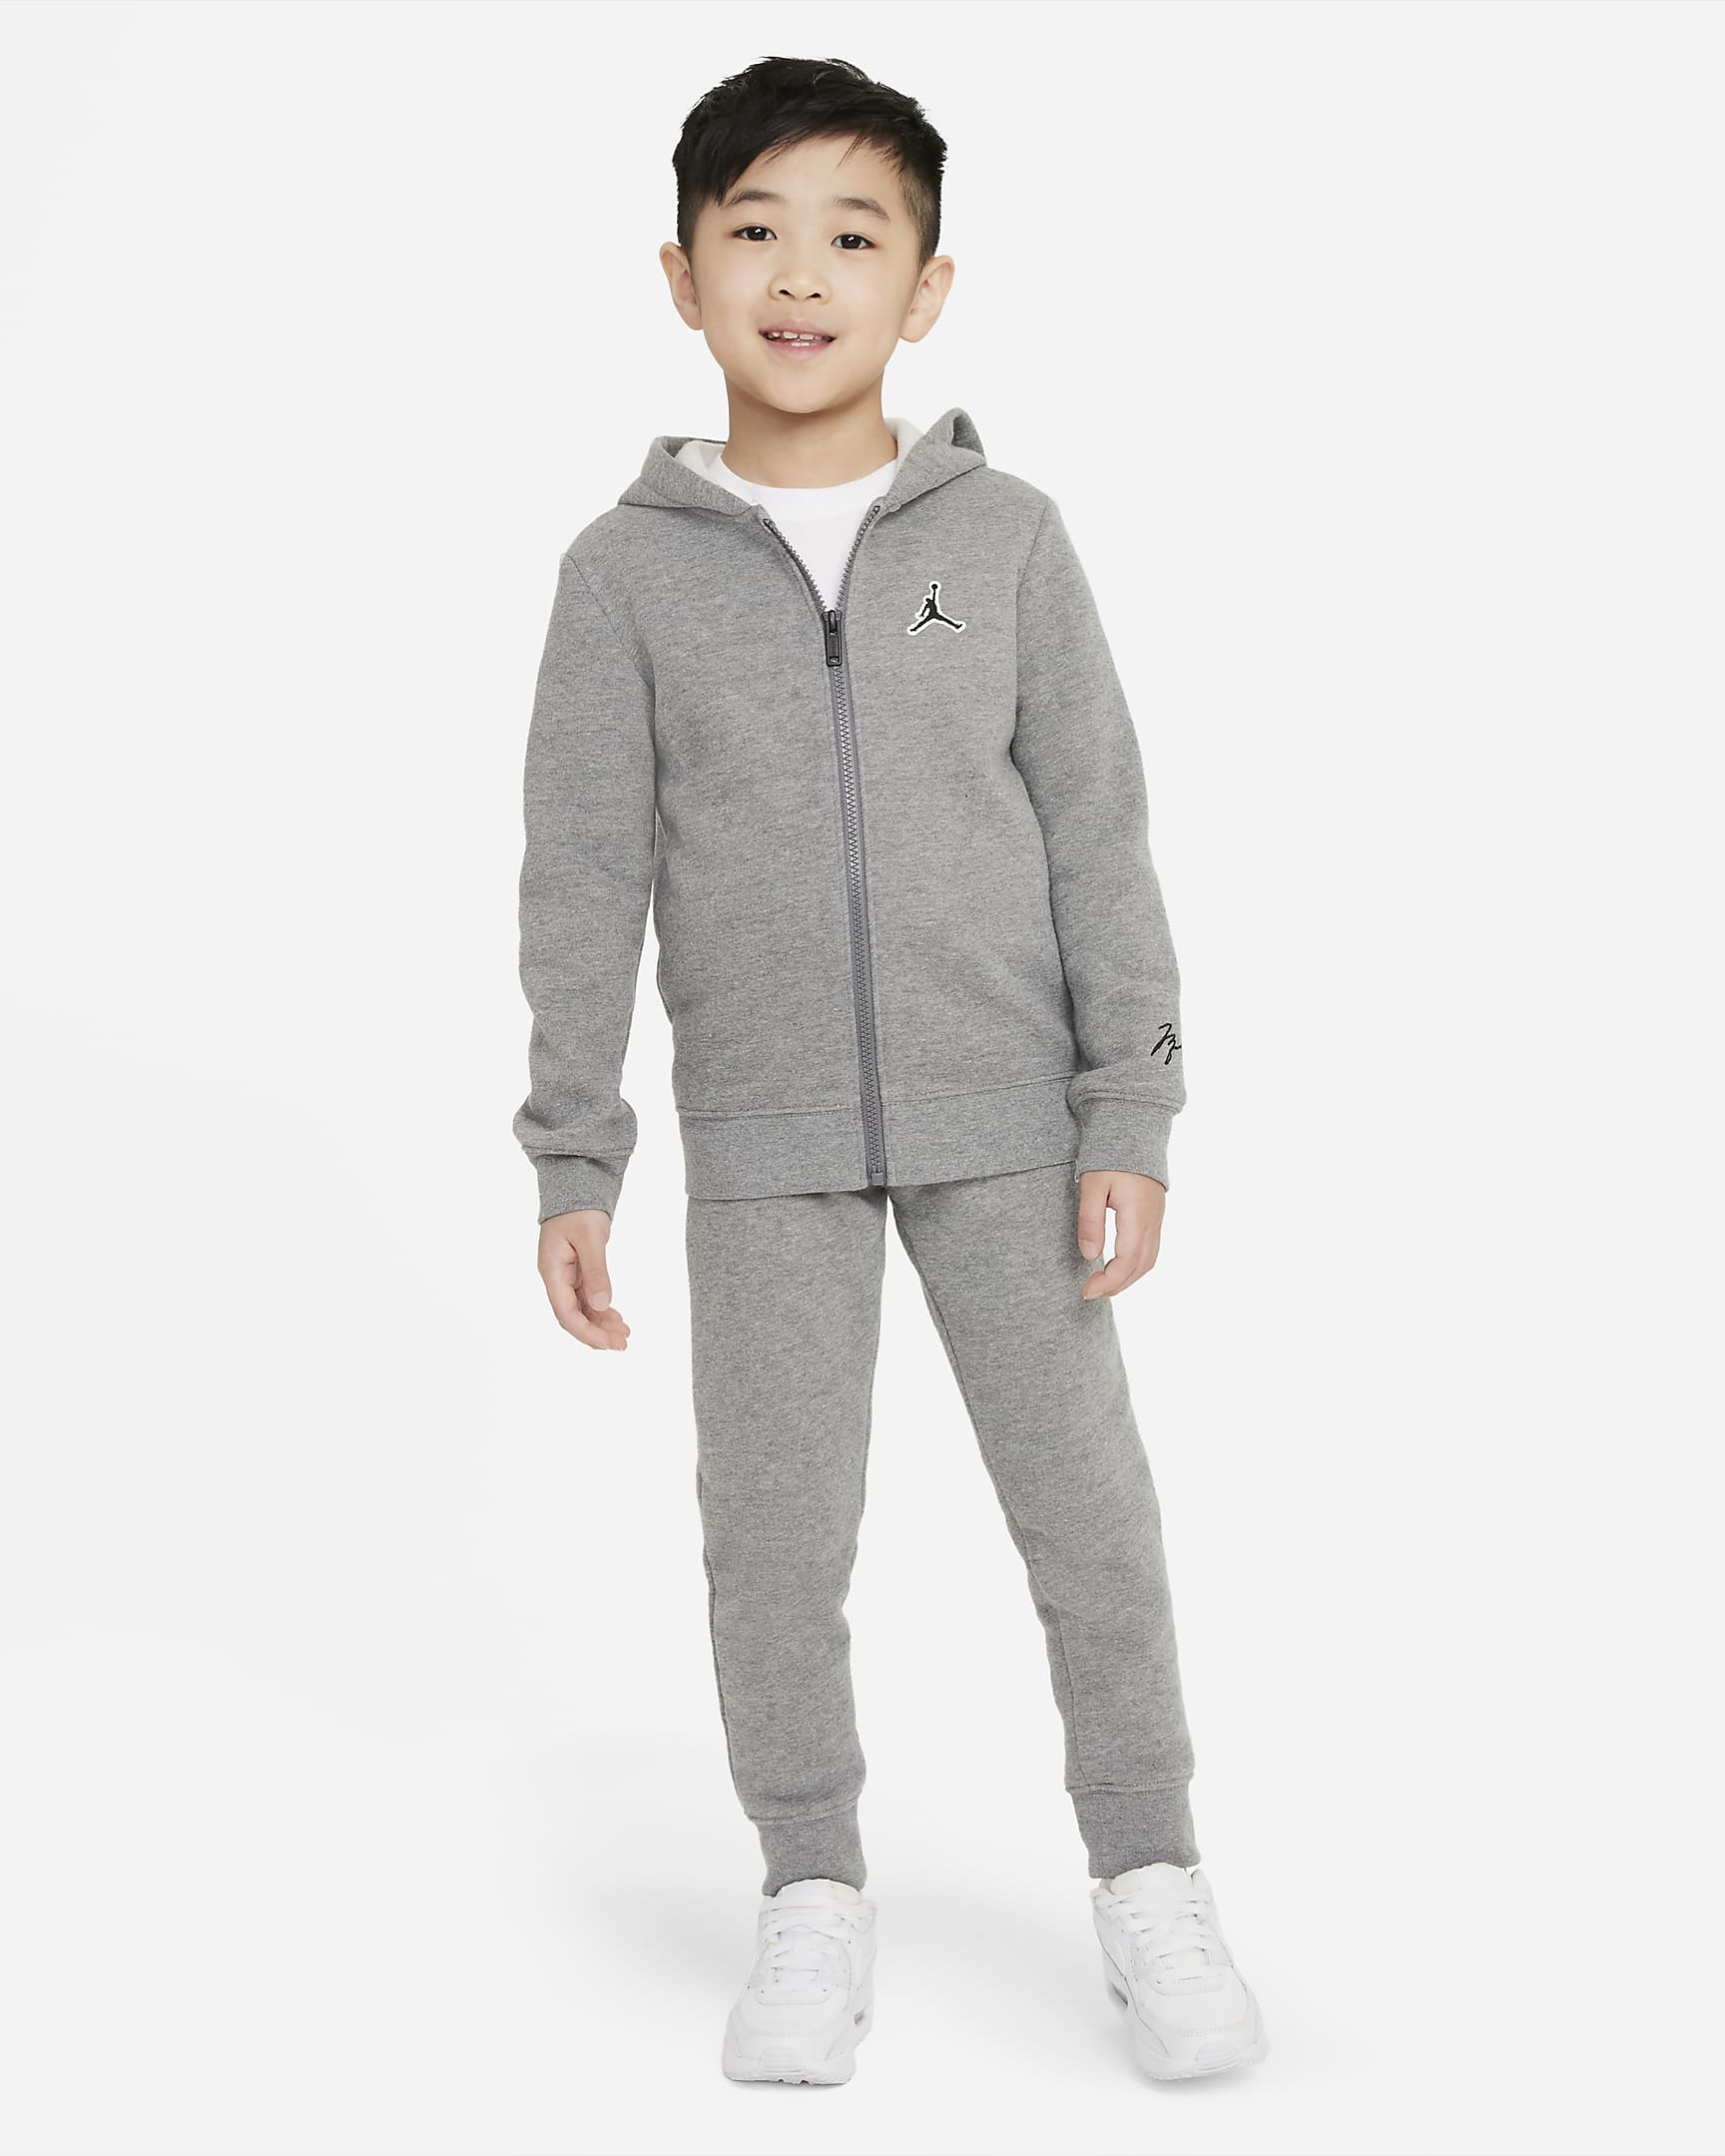 Jordan Younger Kids' Hoodie and Trousers Set - Carbon Heather